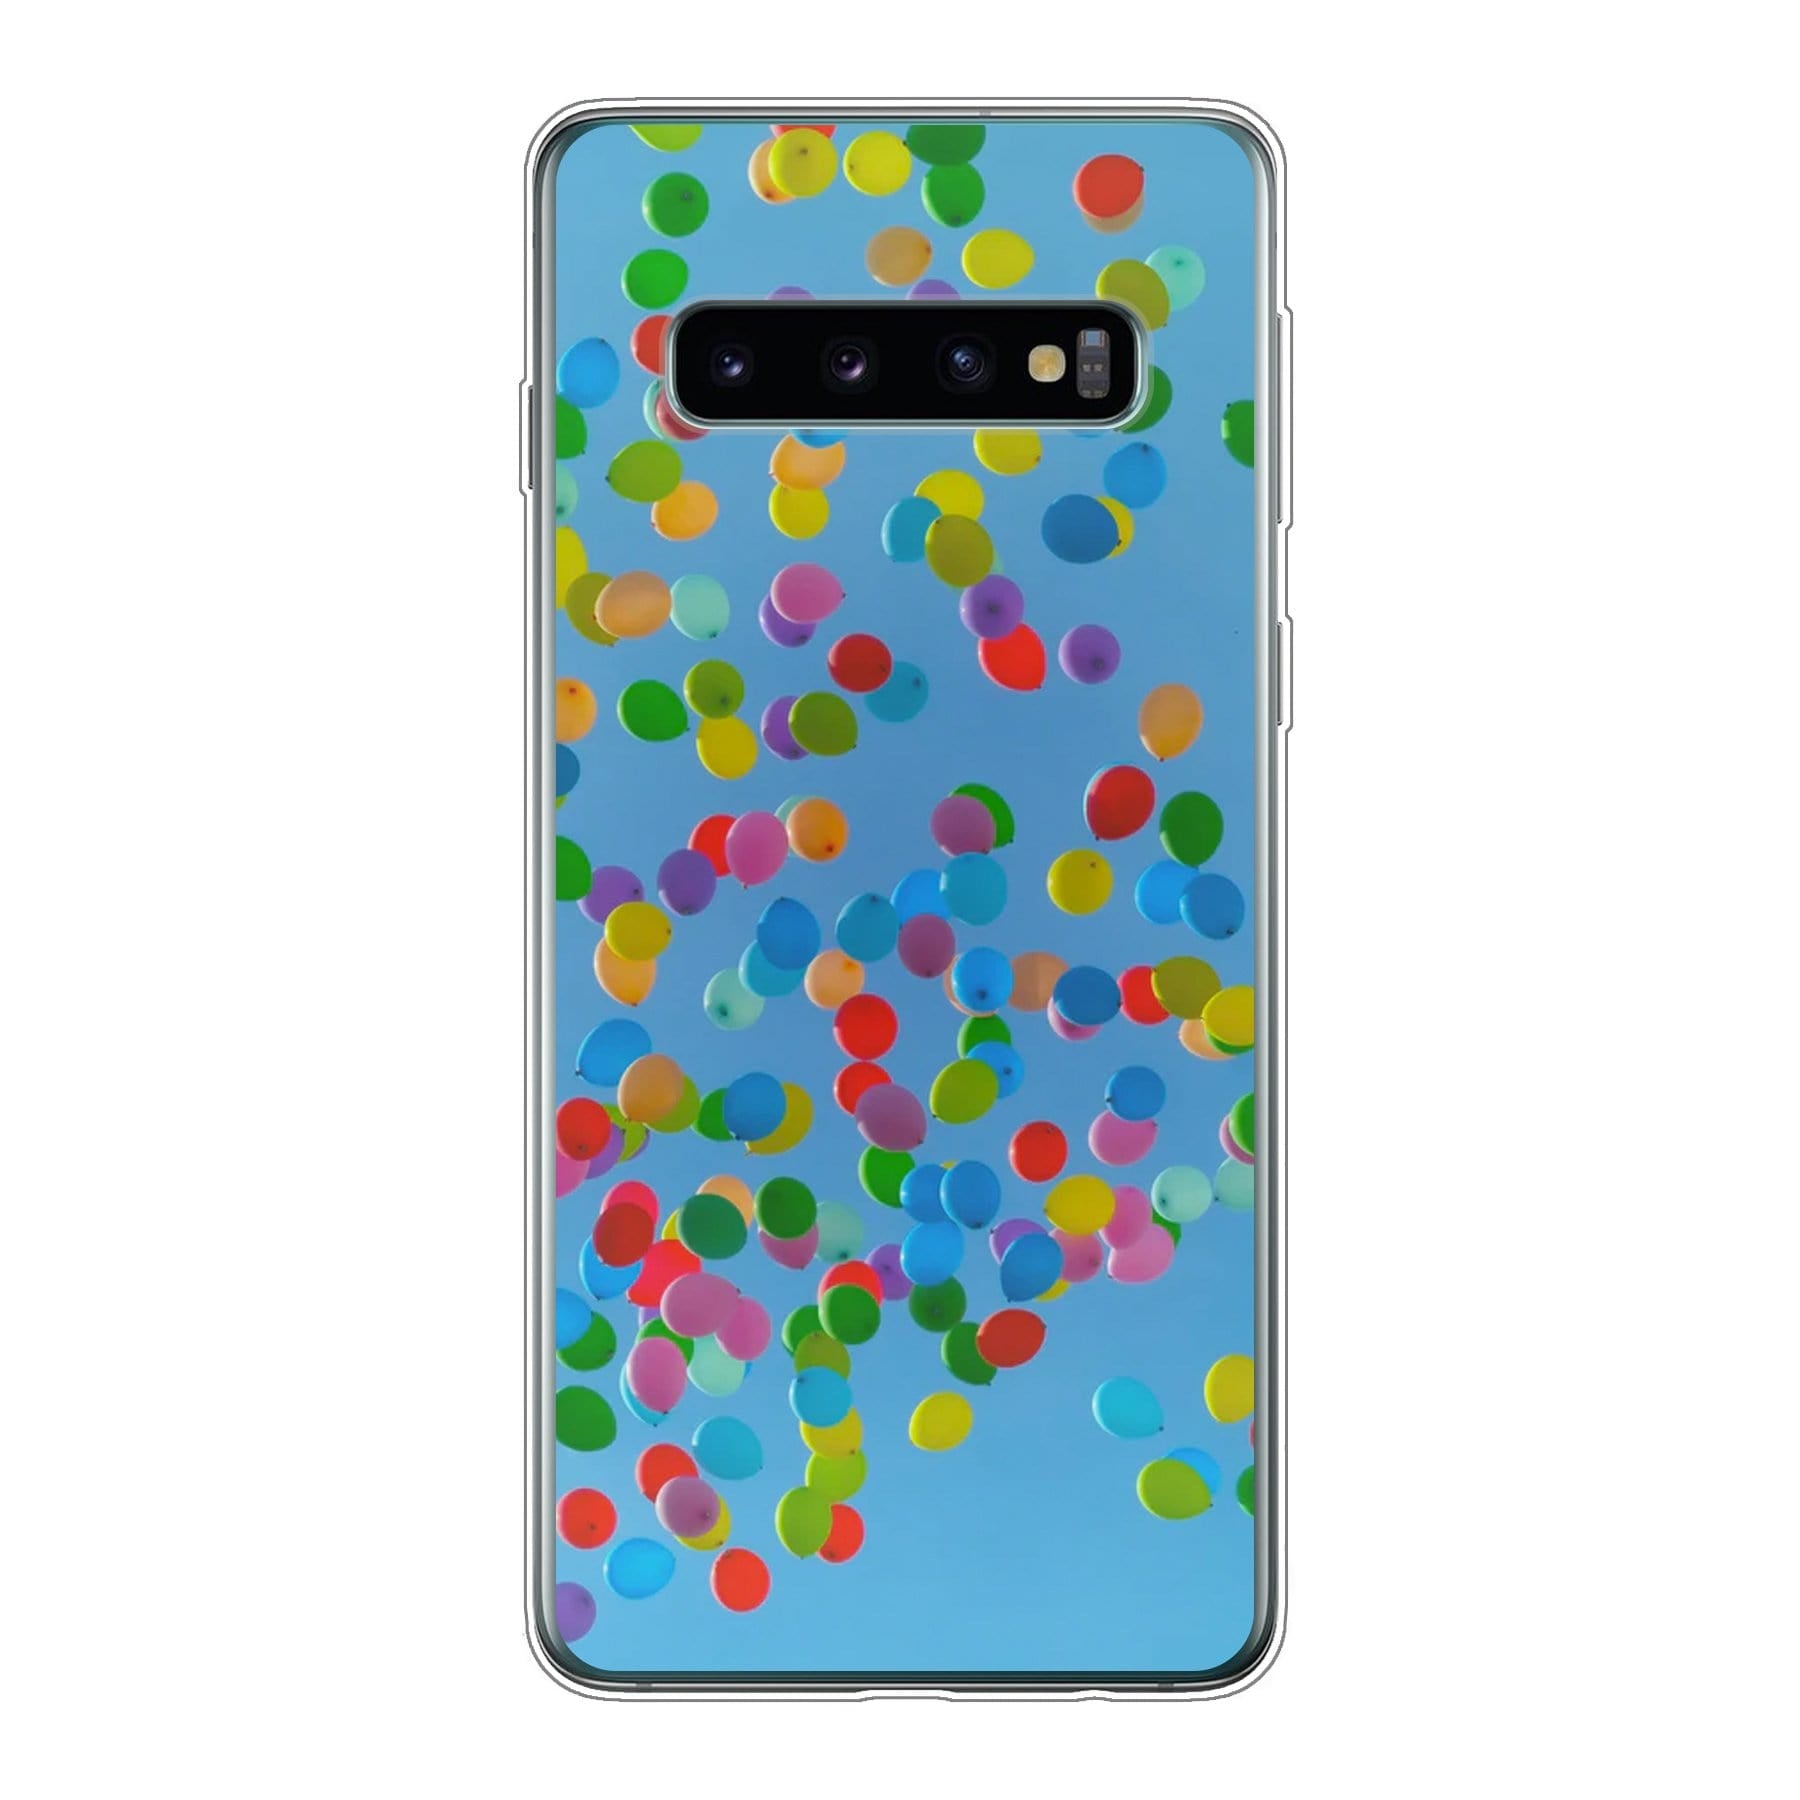 Personalised Samsung Galaxy S10 Soft Phone Case